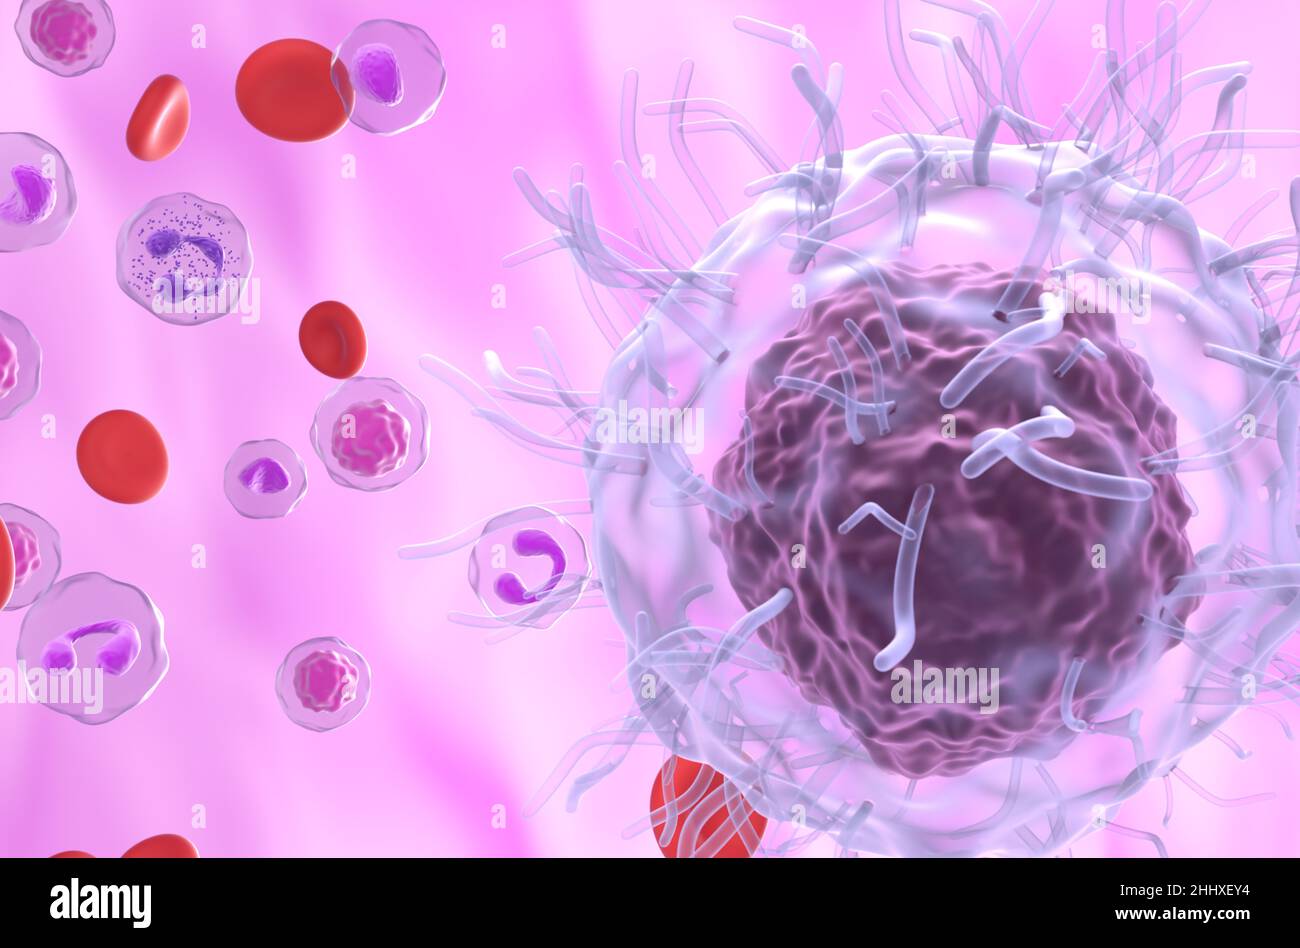 Hairy Cell Leukemia (HCL, HZL) cells in blood flow - closeup view 3d illustration Stock Photo